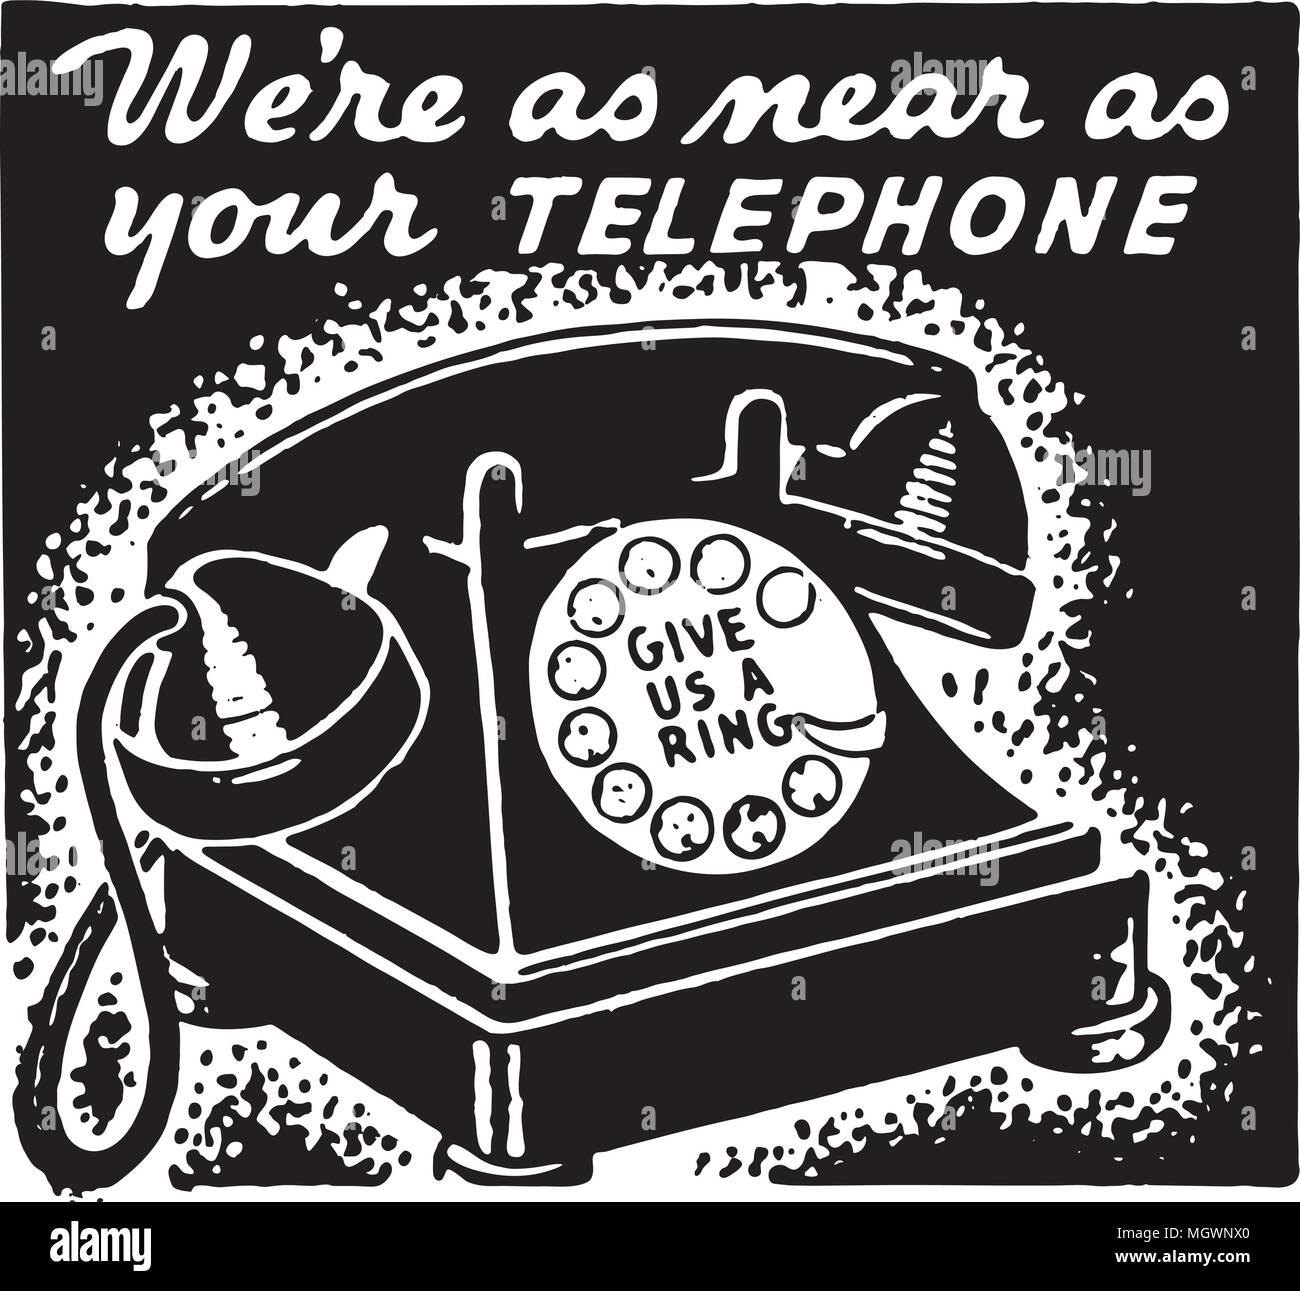 Were As Near As Your Telephone - Retro Ad Art Banner Stock Vector